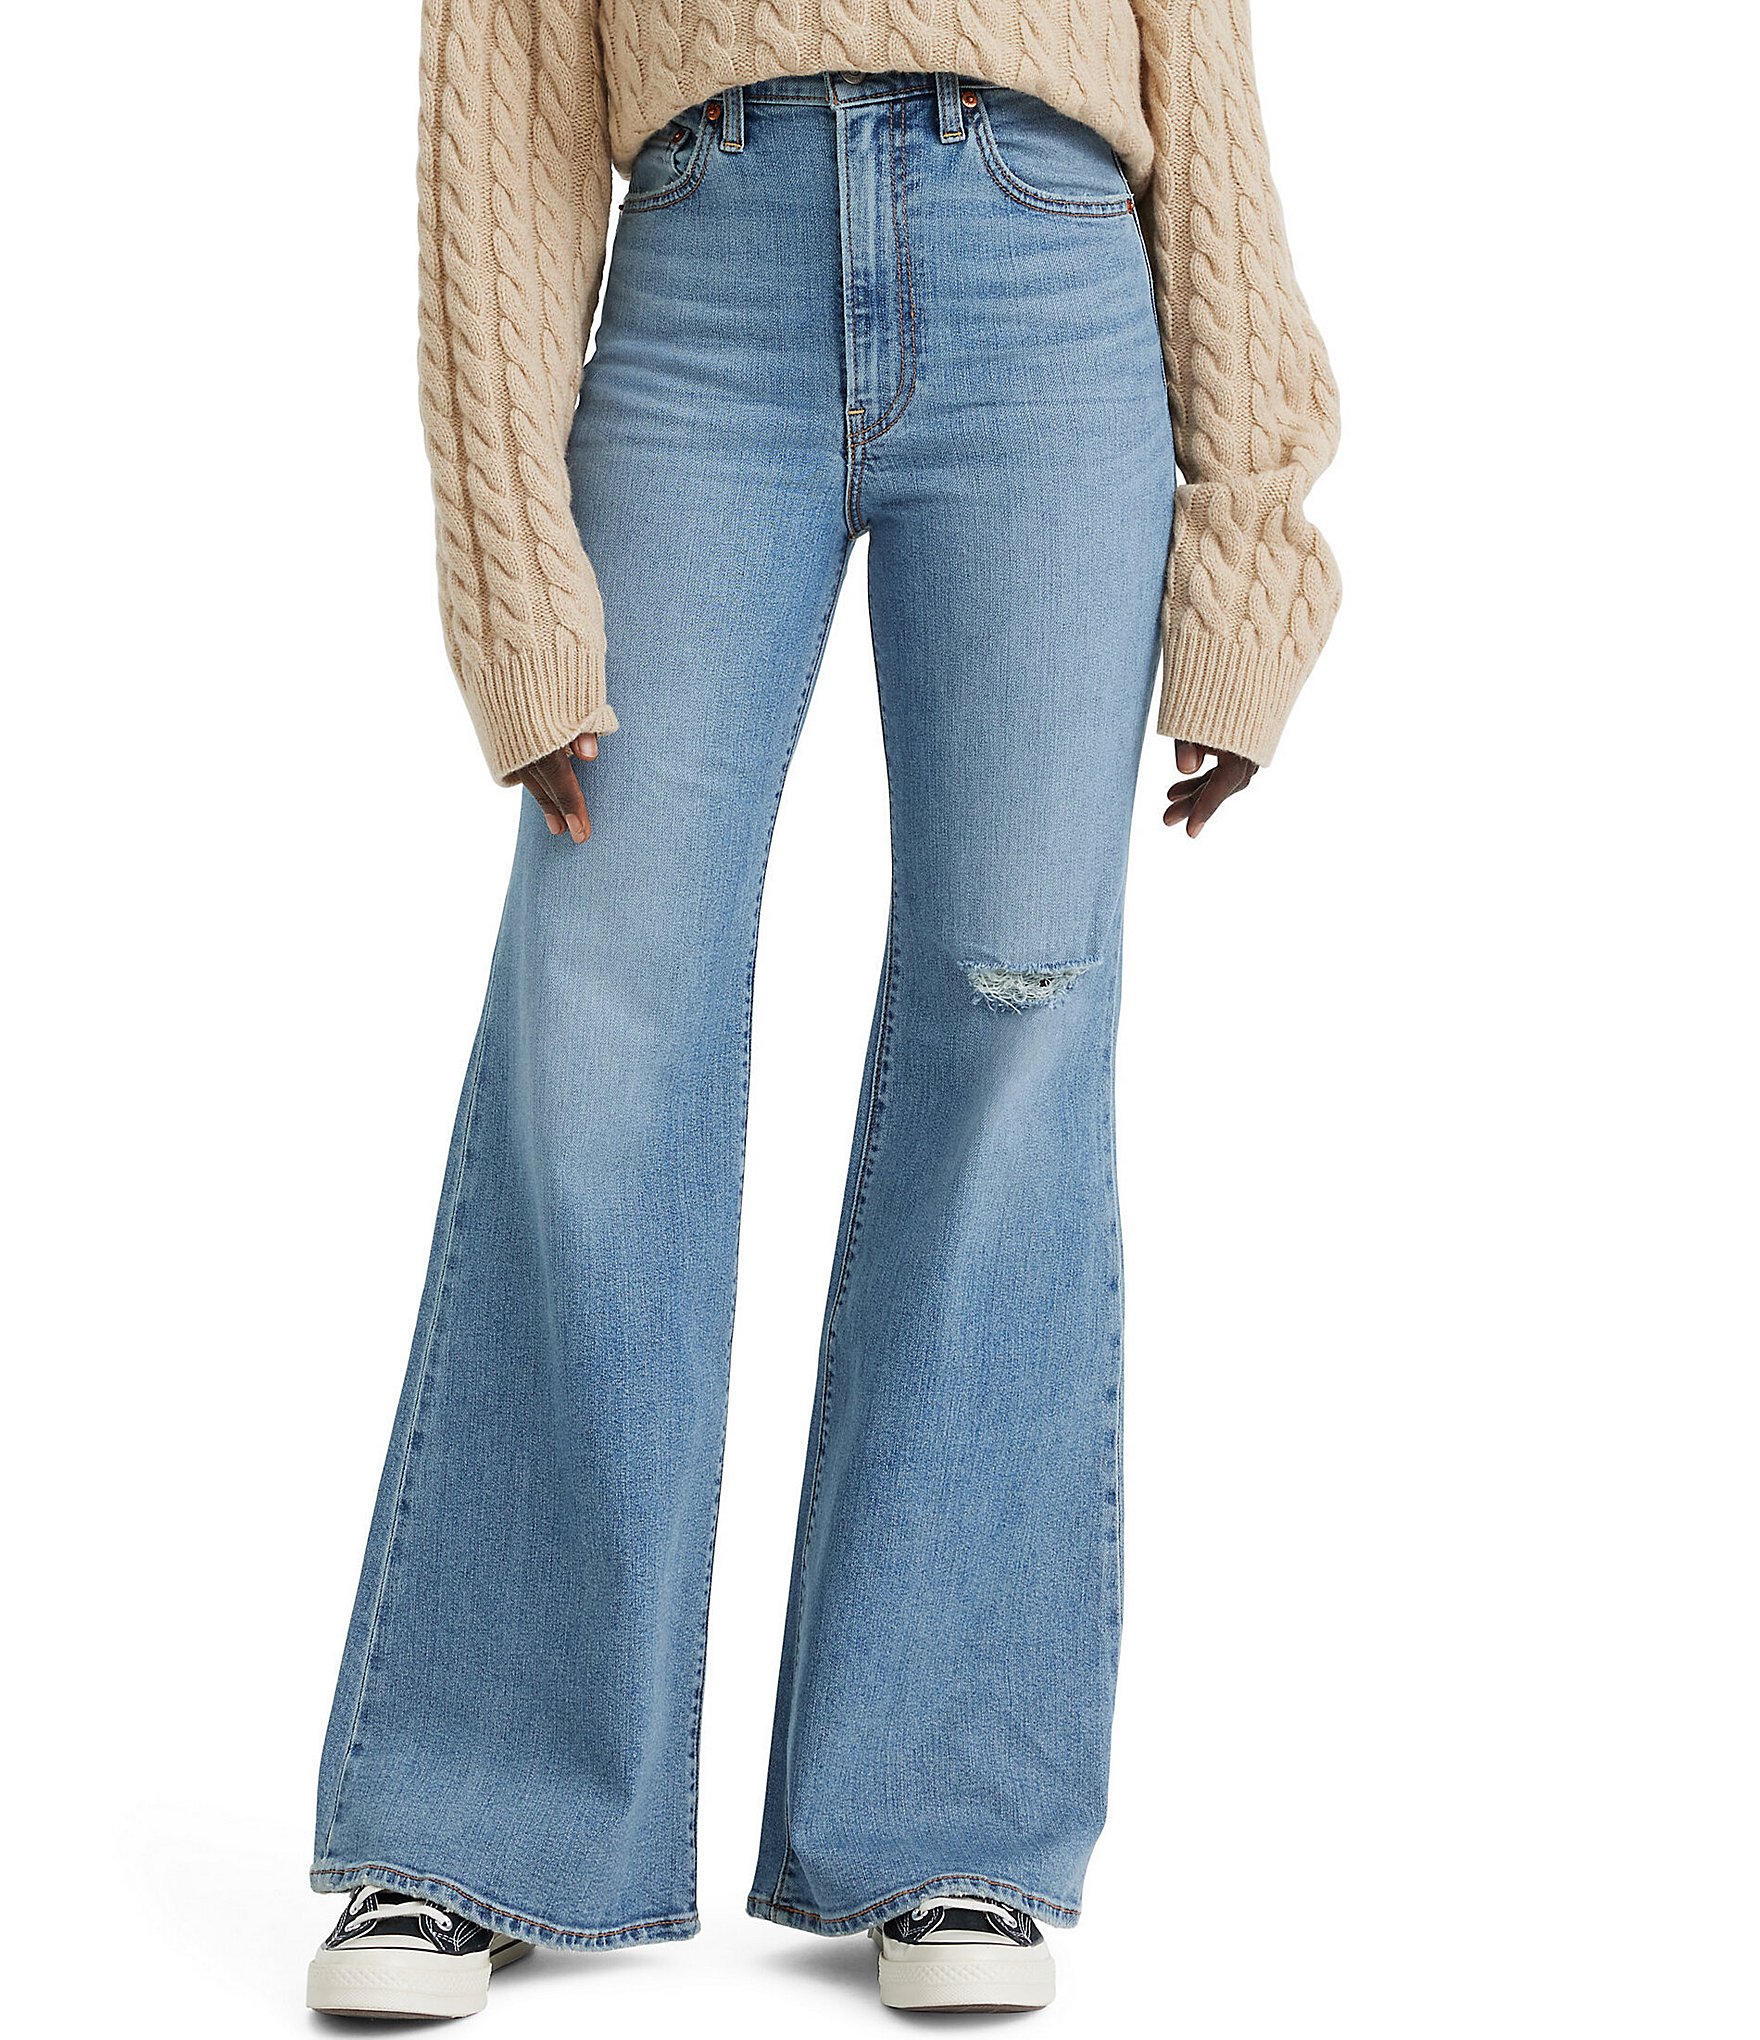 https://dimg.dillards.com/is/image/DillardsZoom/zoom/levis-ribcage-high-rise-distressed-flare-jeans/00000000_zi_2c255d86-bf5e-4cf2-9a73-692a66c52f87.jpg